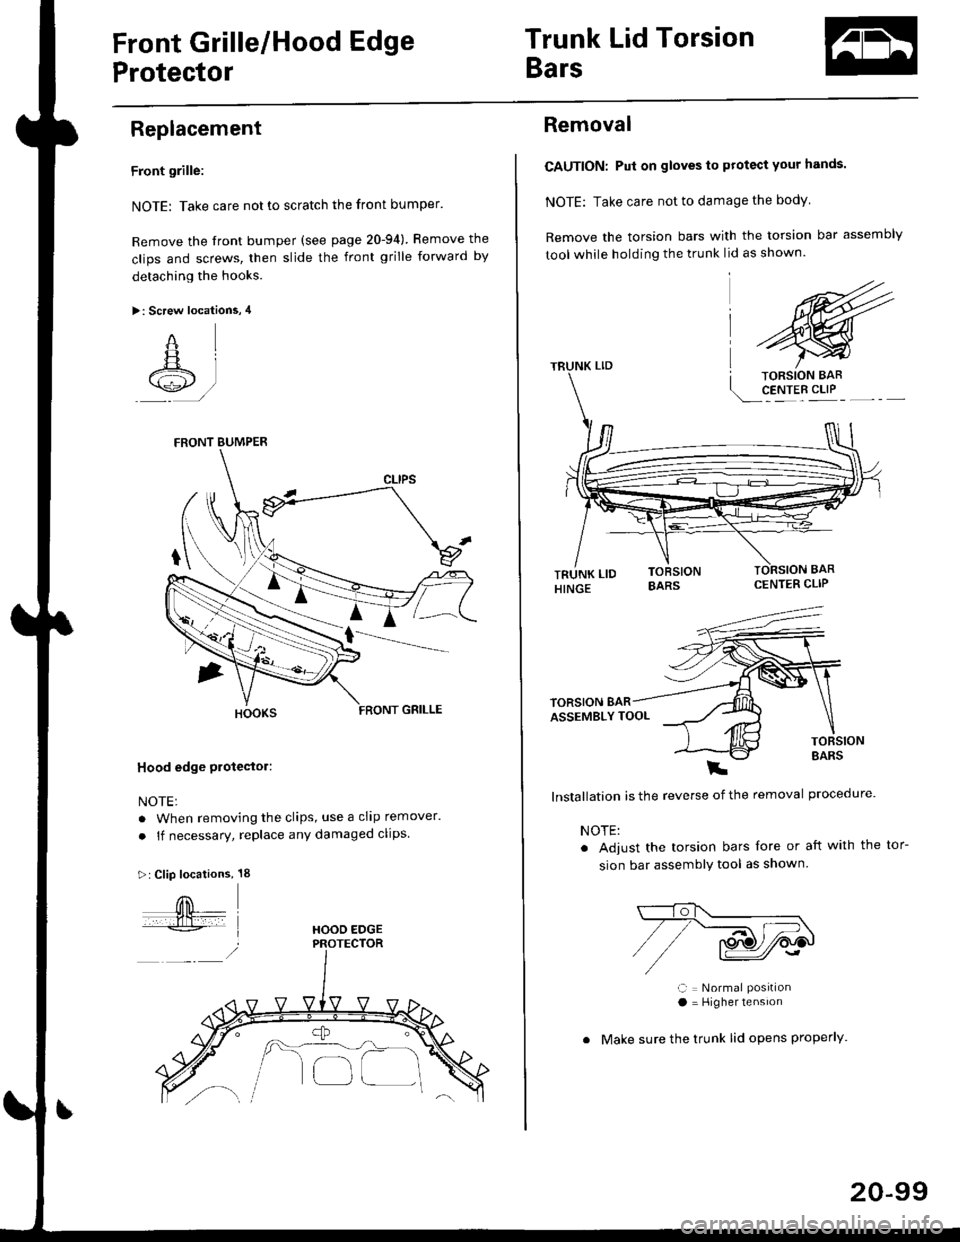 HONDA CIVIC 1996 6.G Workshop Manual Front Grille/Hood Edge
Protector
Trunk Lid Torsion
Bars
Replacement
Front grille:
NOTE: Take care not to scratch the front bumper
Remove the front bumper (see page 20-94) Bemove the
clips and screws,